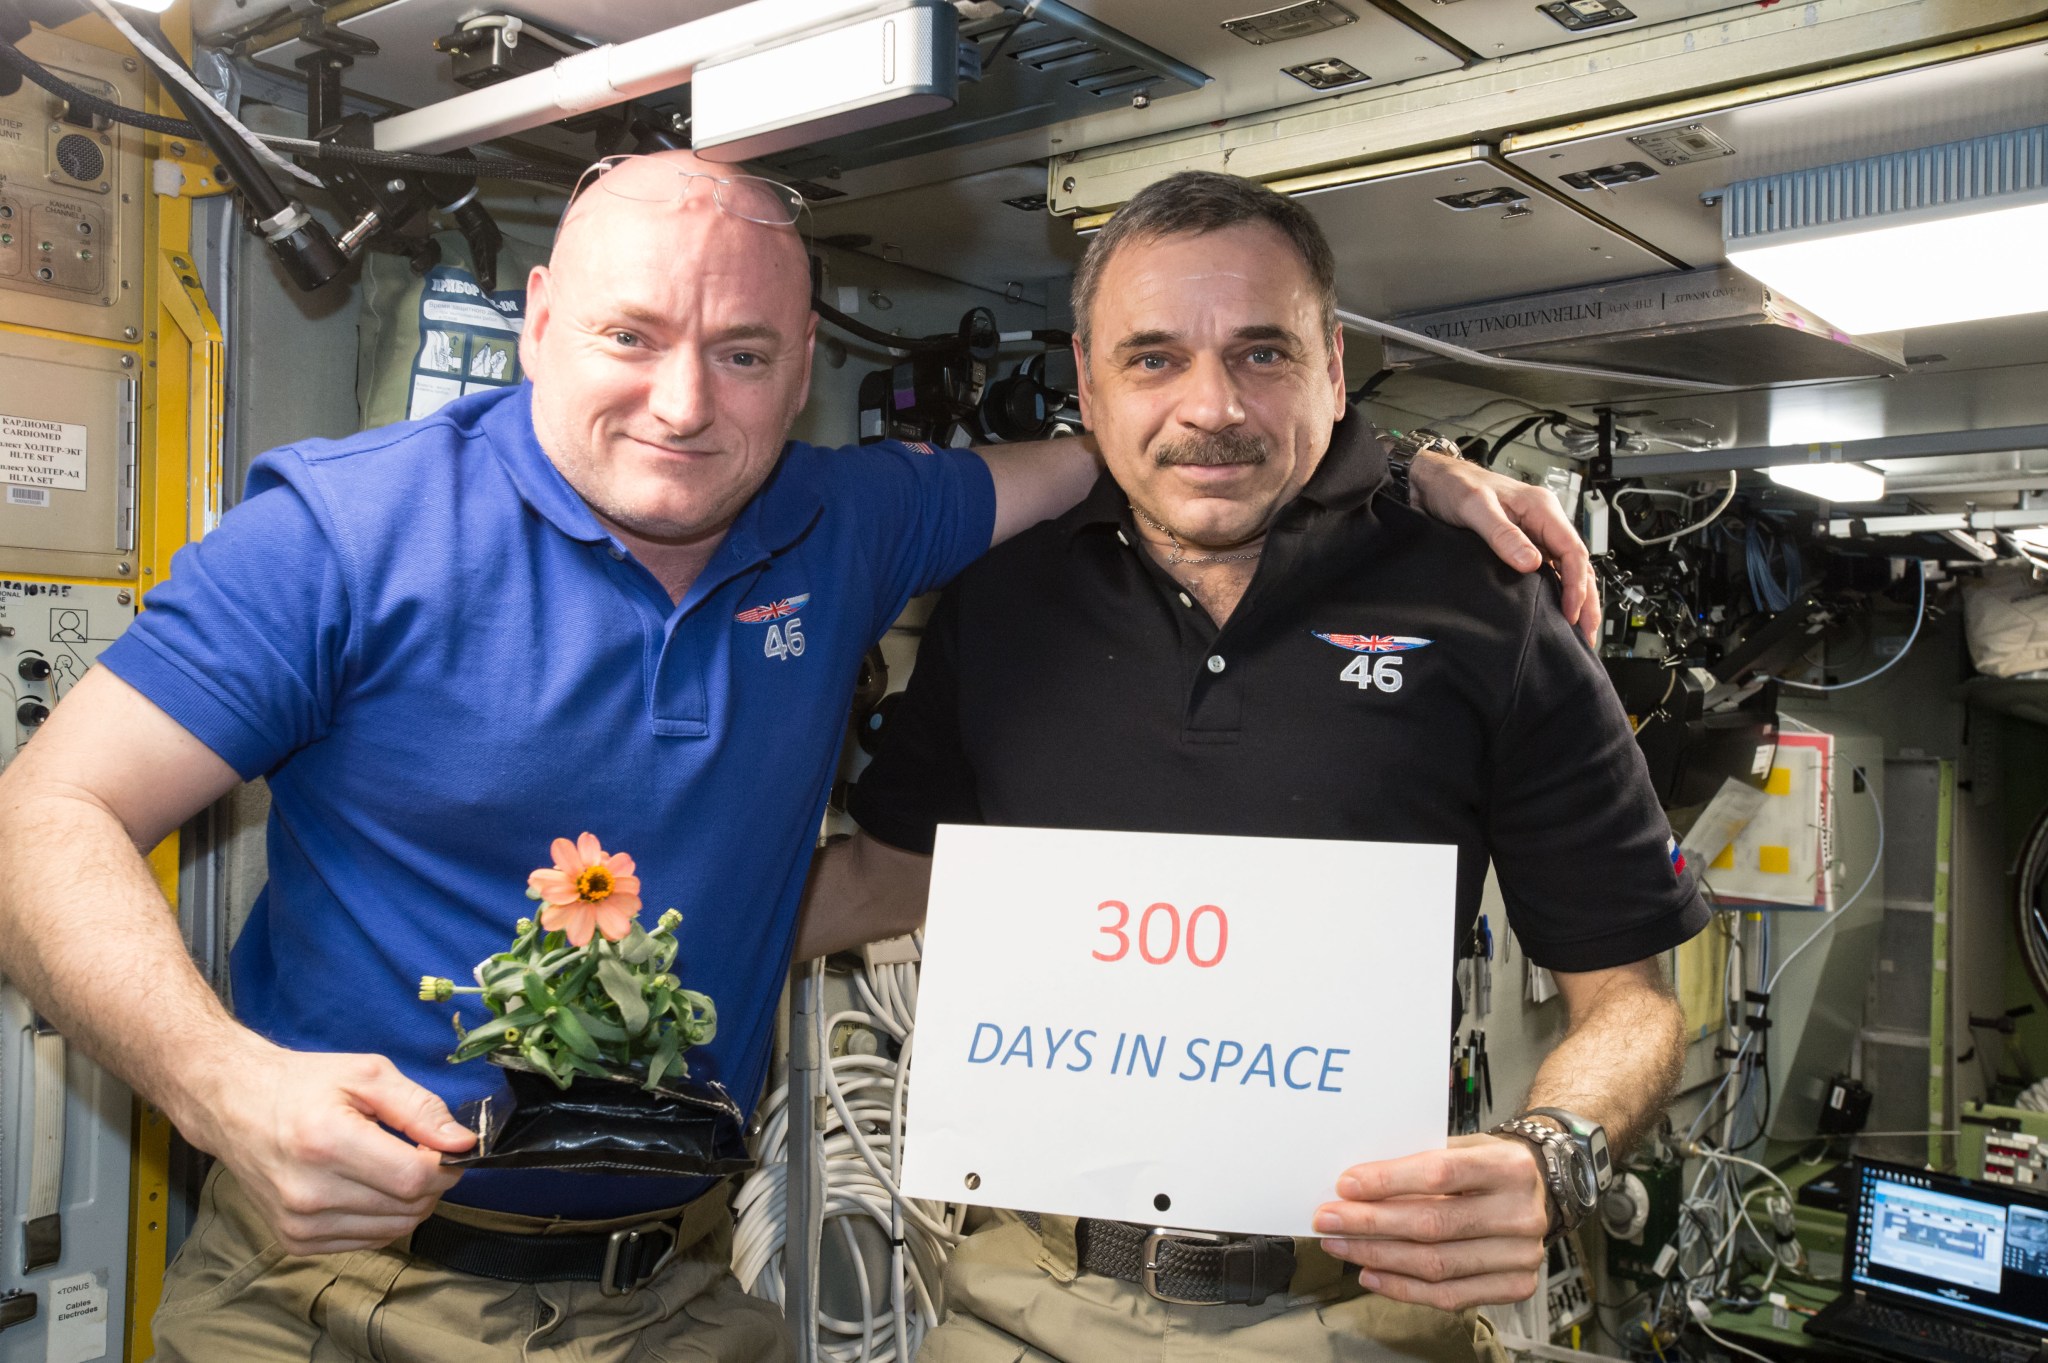 One-year mission crew members Scott Kelly of NASA (left) and Mikhail Kornienko of Roscosmos (right)